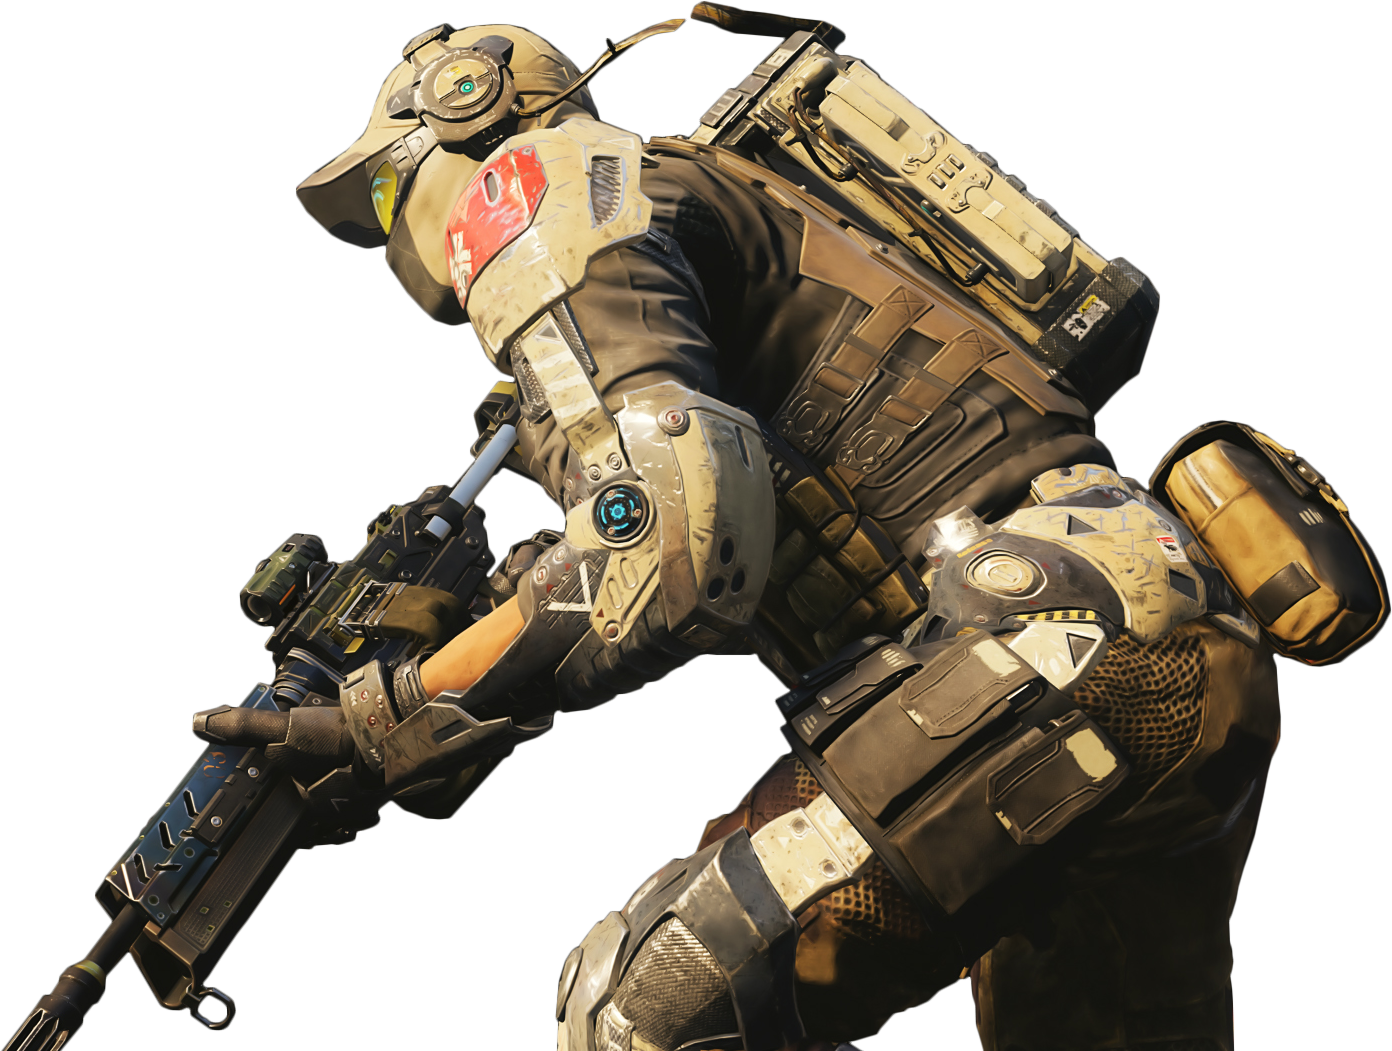 Call of Duty Black Ops Cold War PNG Transparent Image